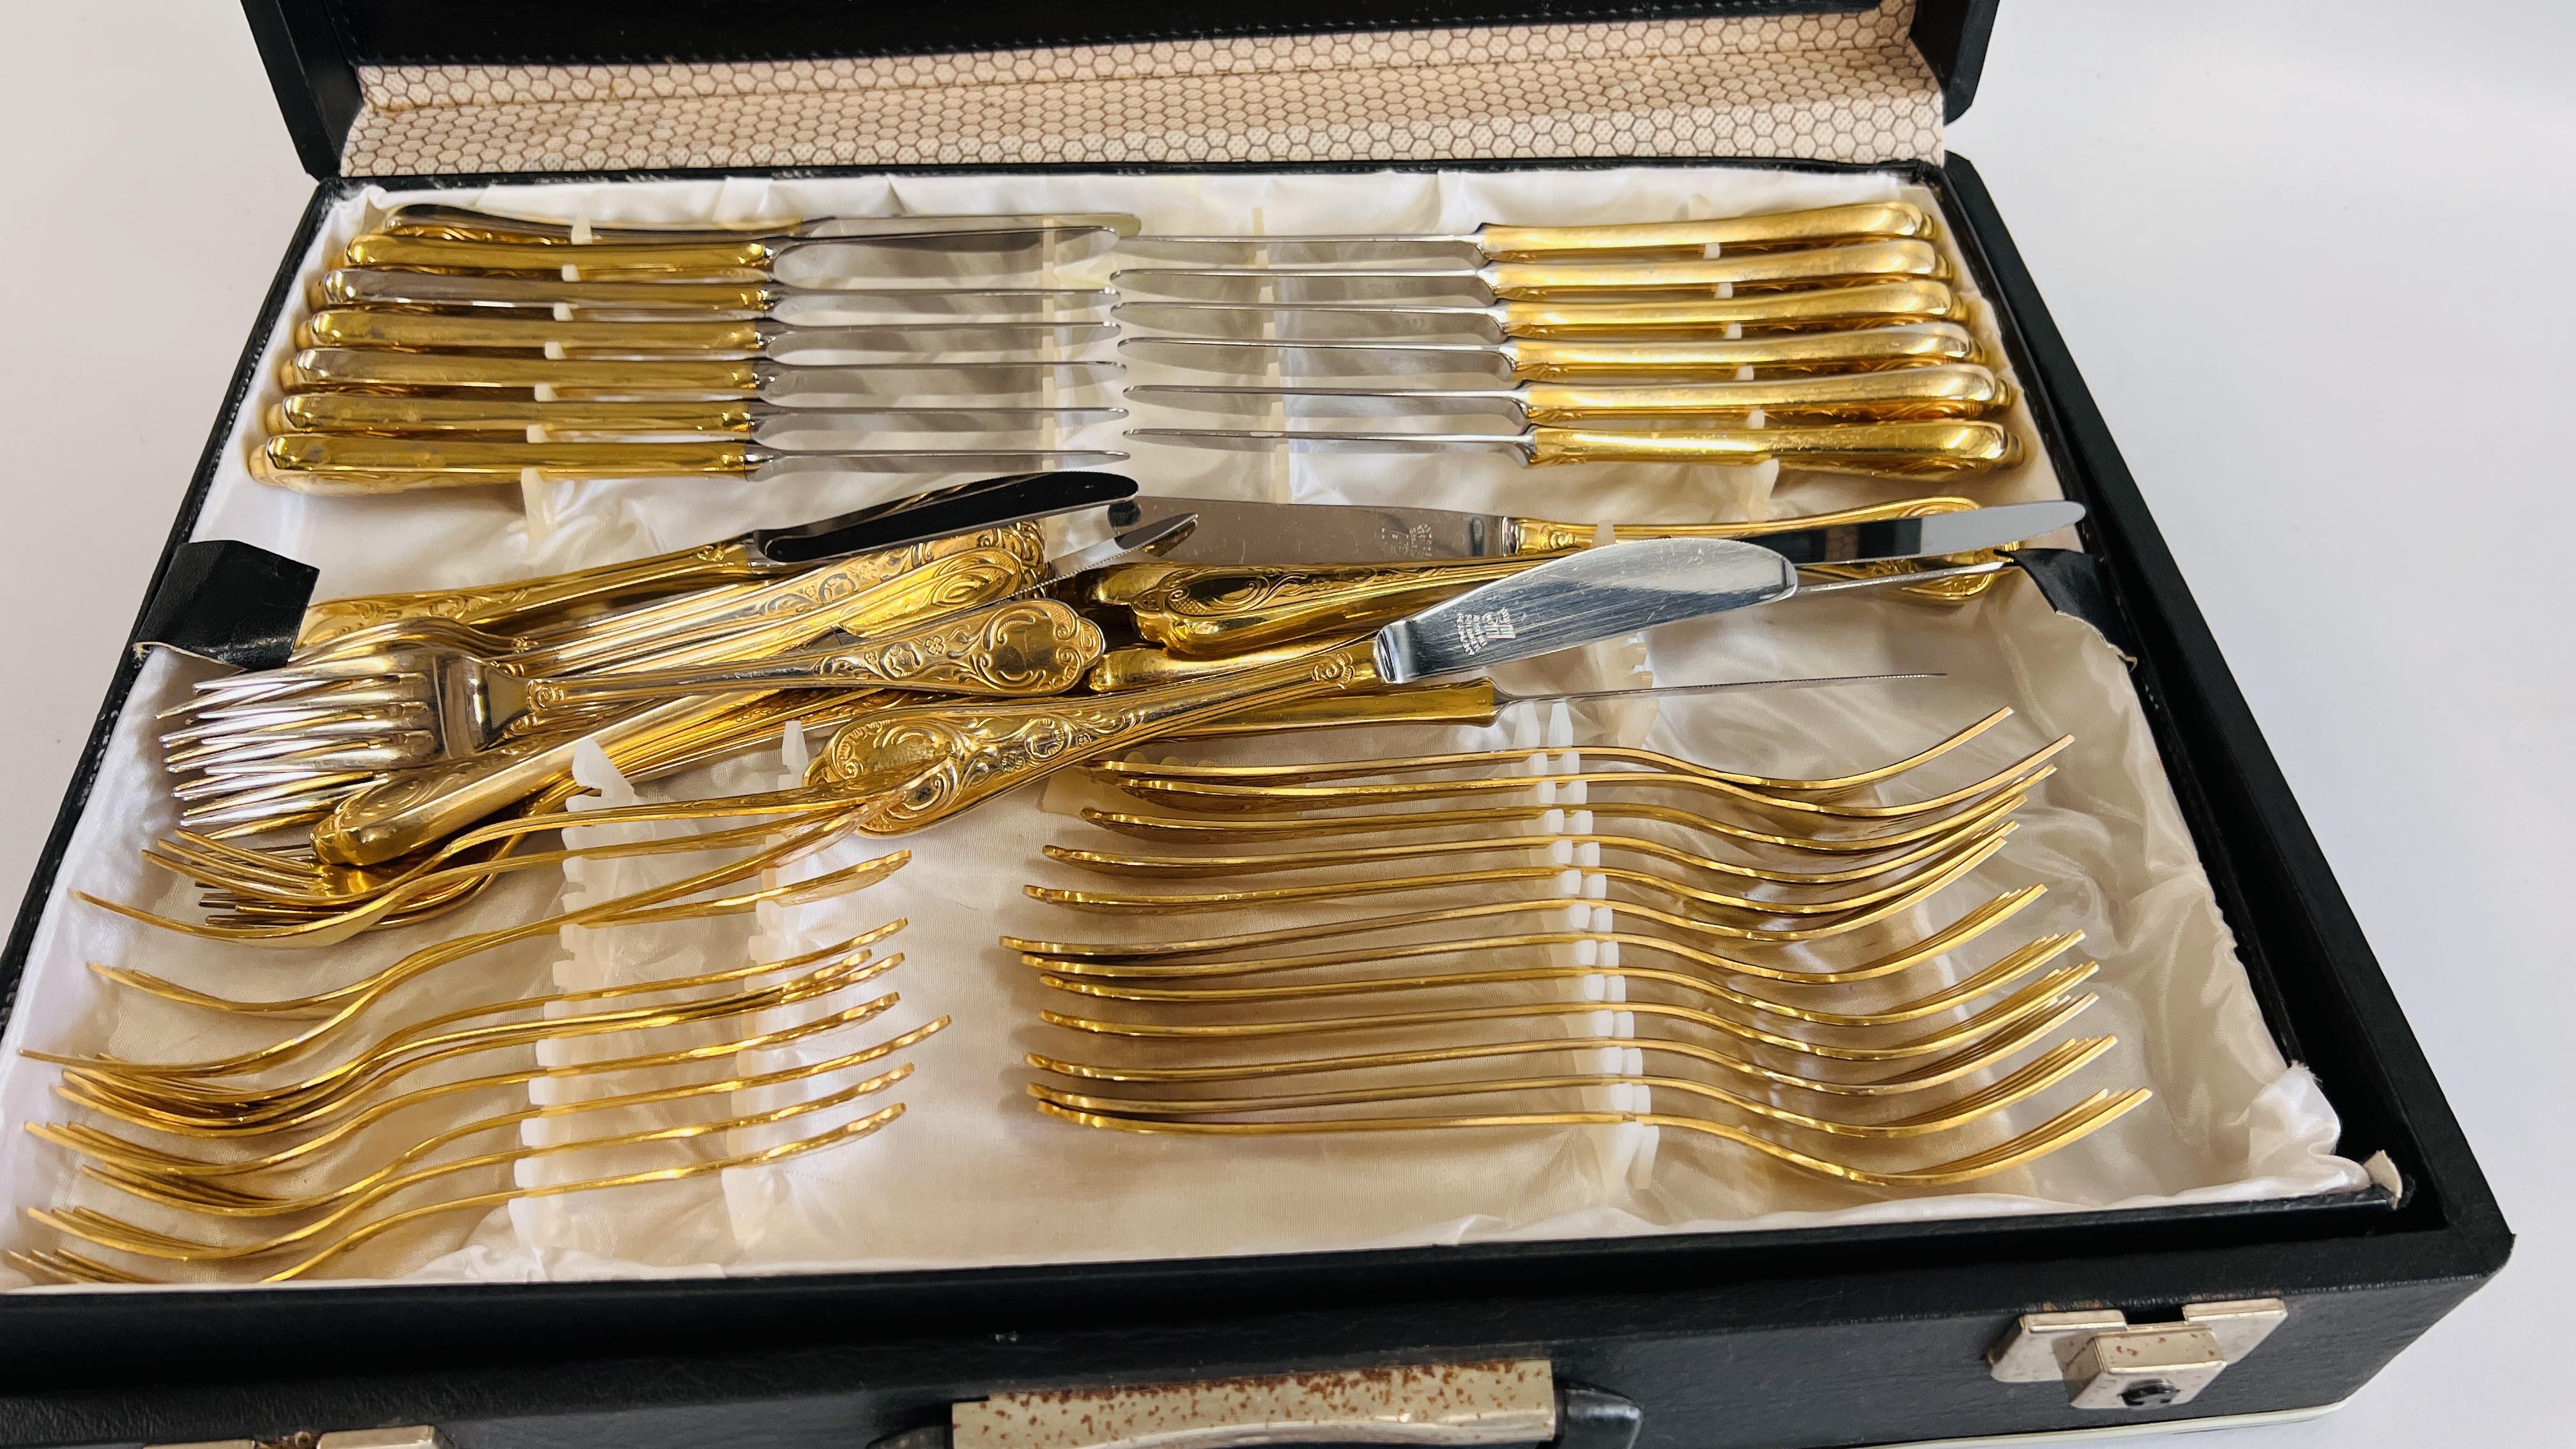 A VINTAGE "ROSTFREI SOLINGEN" GERMAN CUTLERY SET APPROX 119 PIECES, INCOMPLETE. - Image 2 of 3